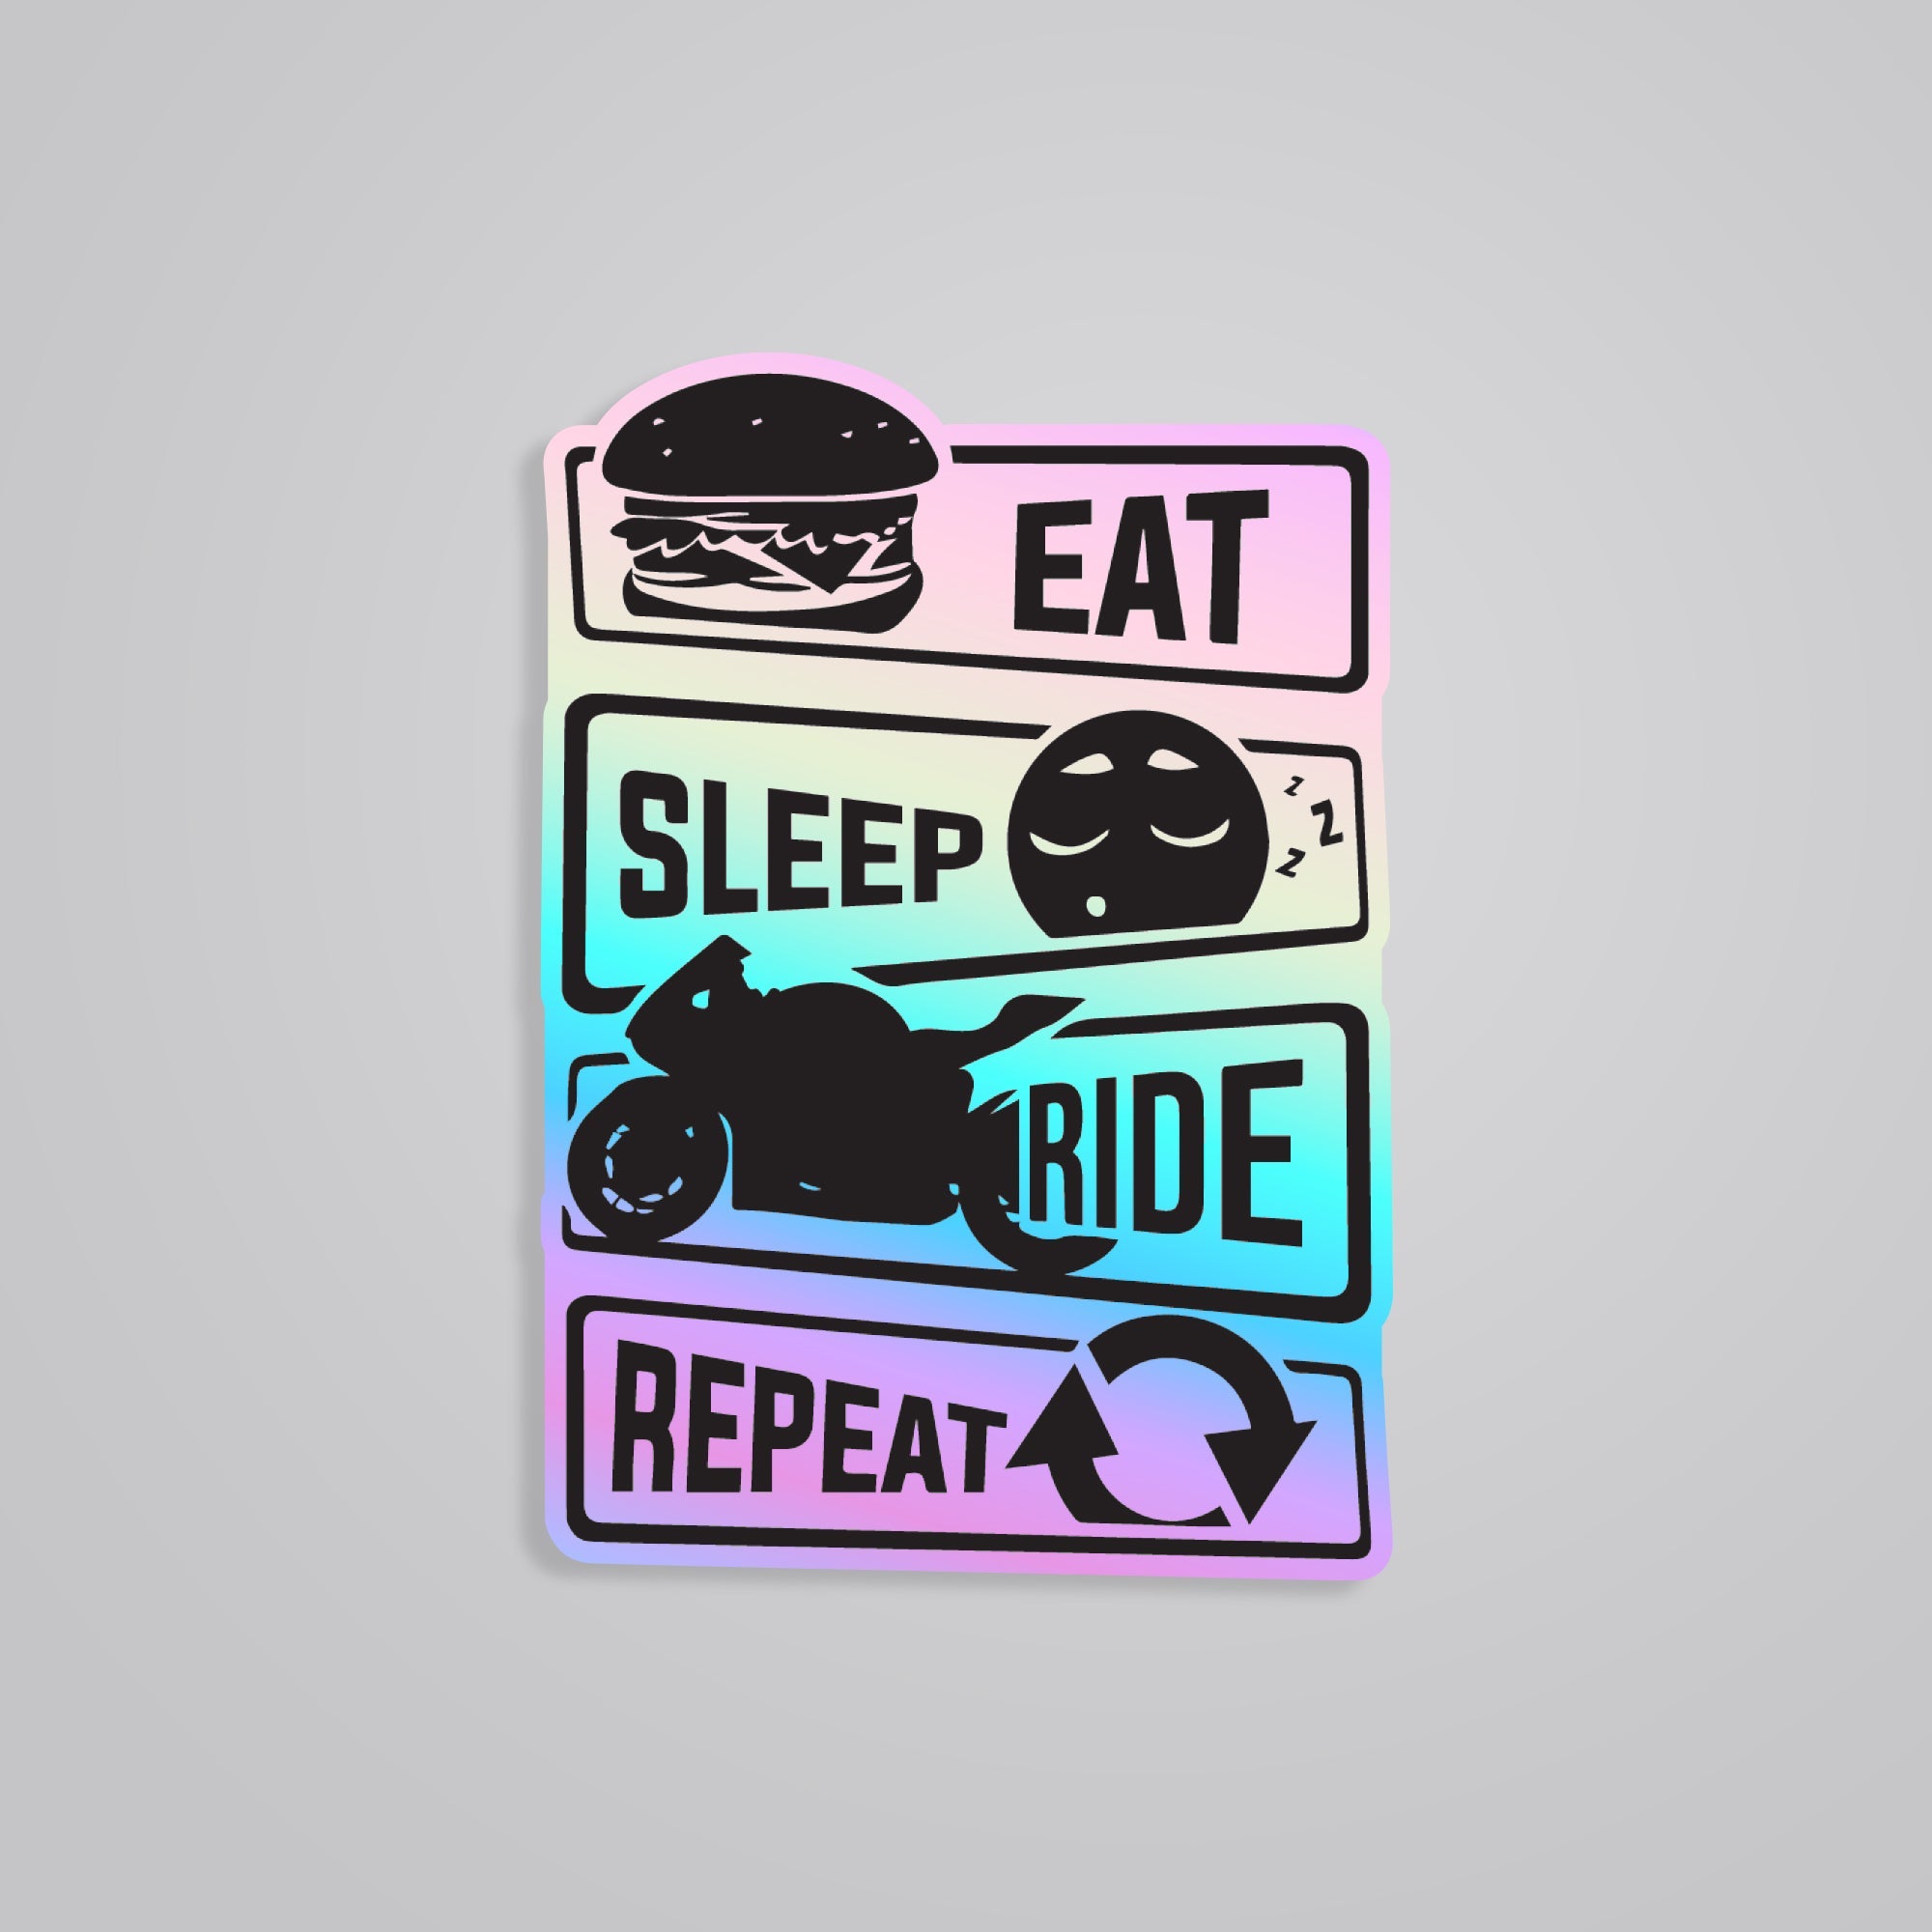 Fomo Store Holographic Stickers Cars & Bikes Eat Sleep Ride & Repeat